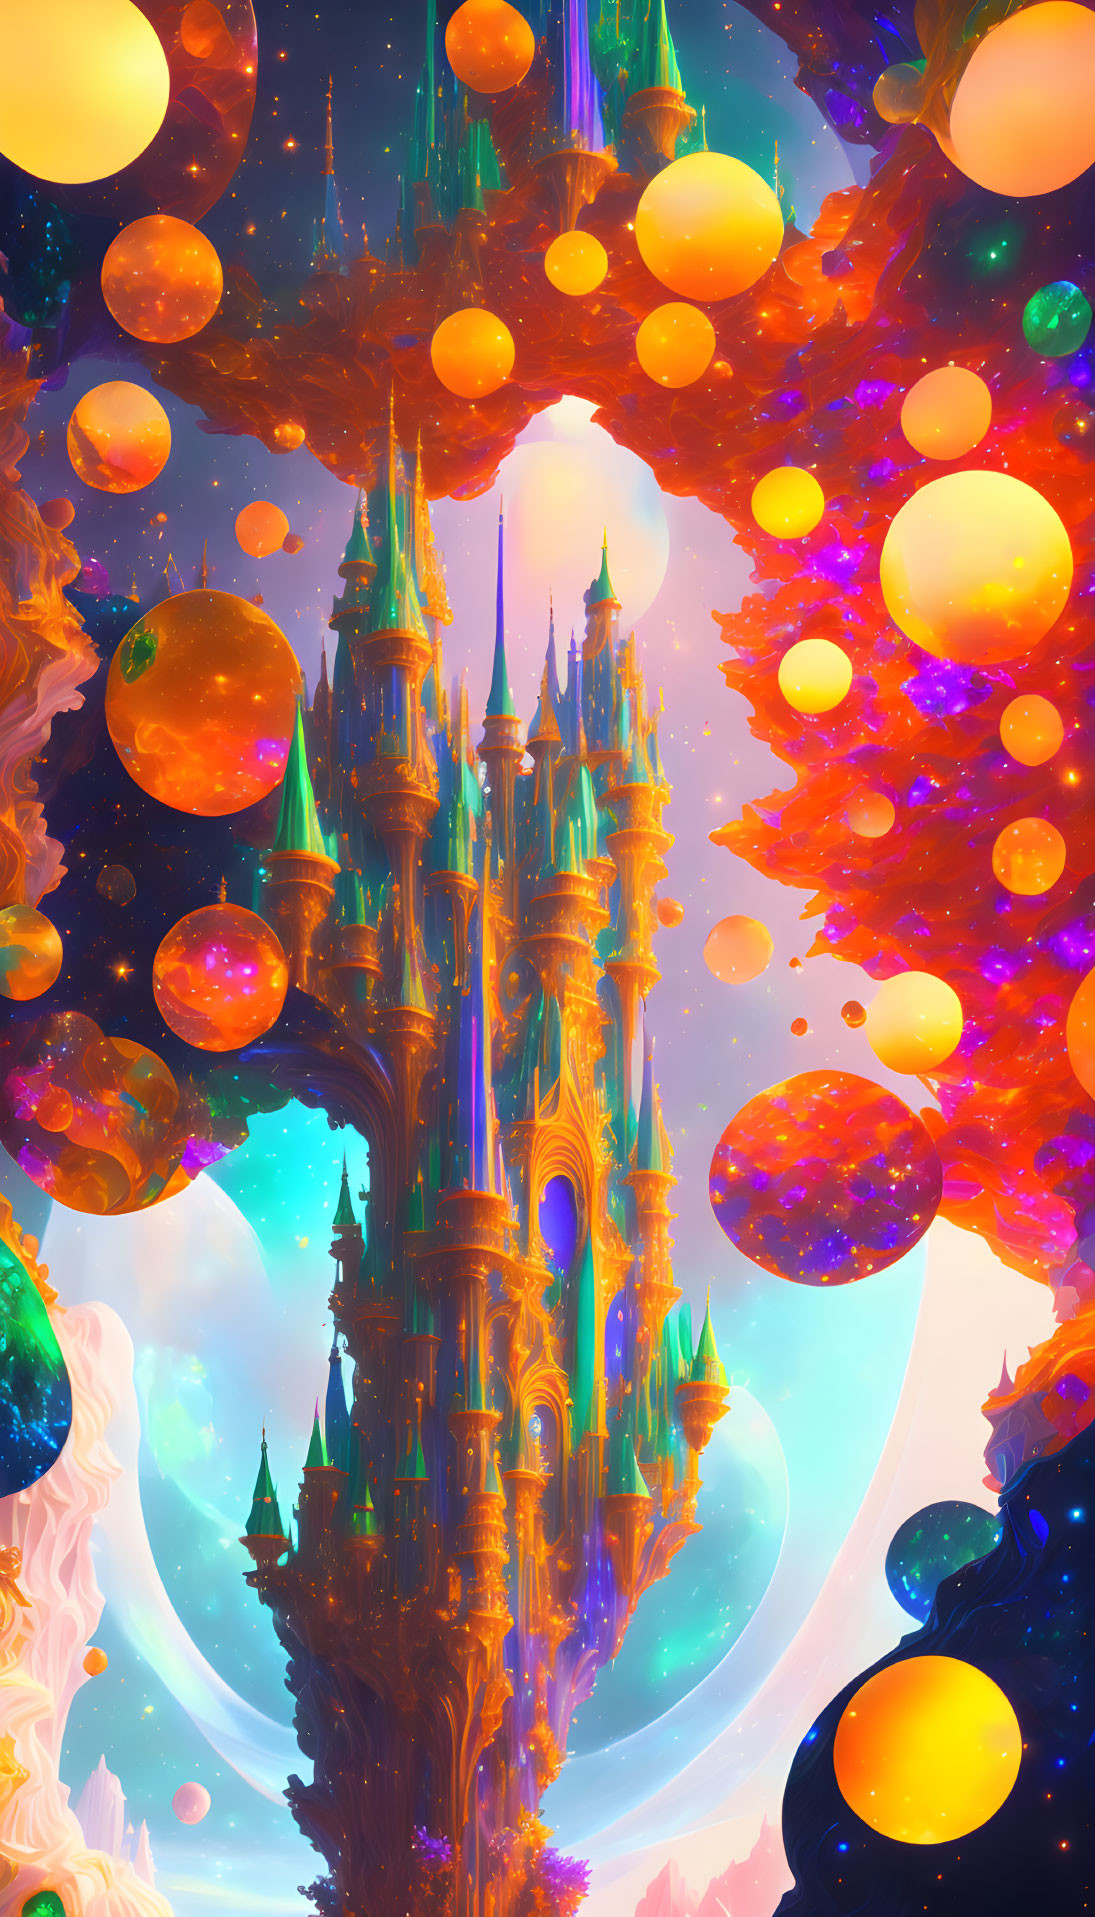 Fantasy castle surrounded by colorful orbs and celestial bodies